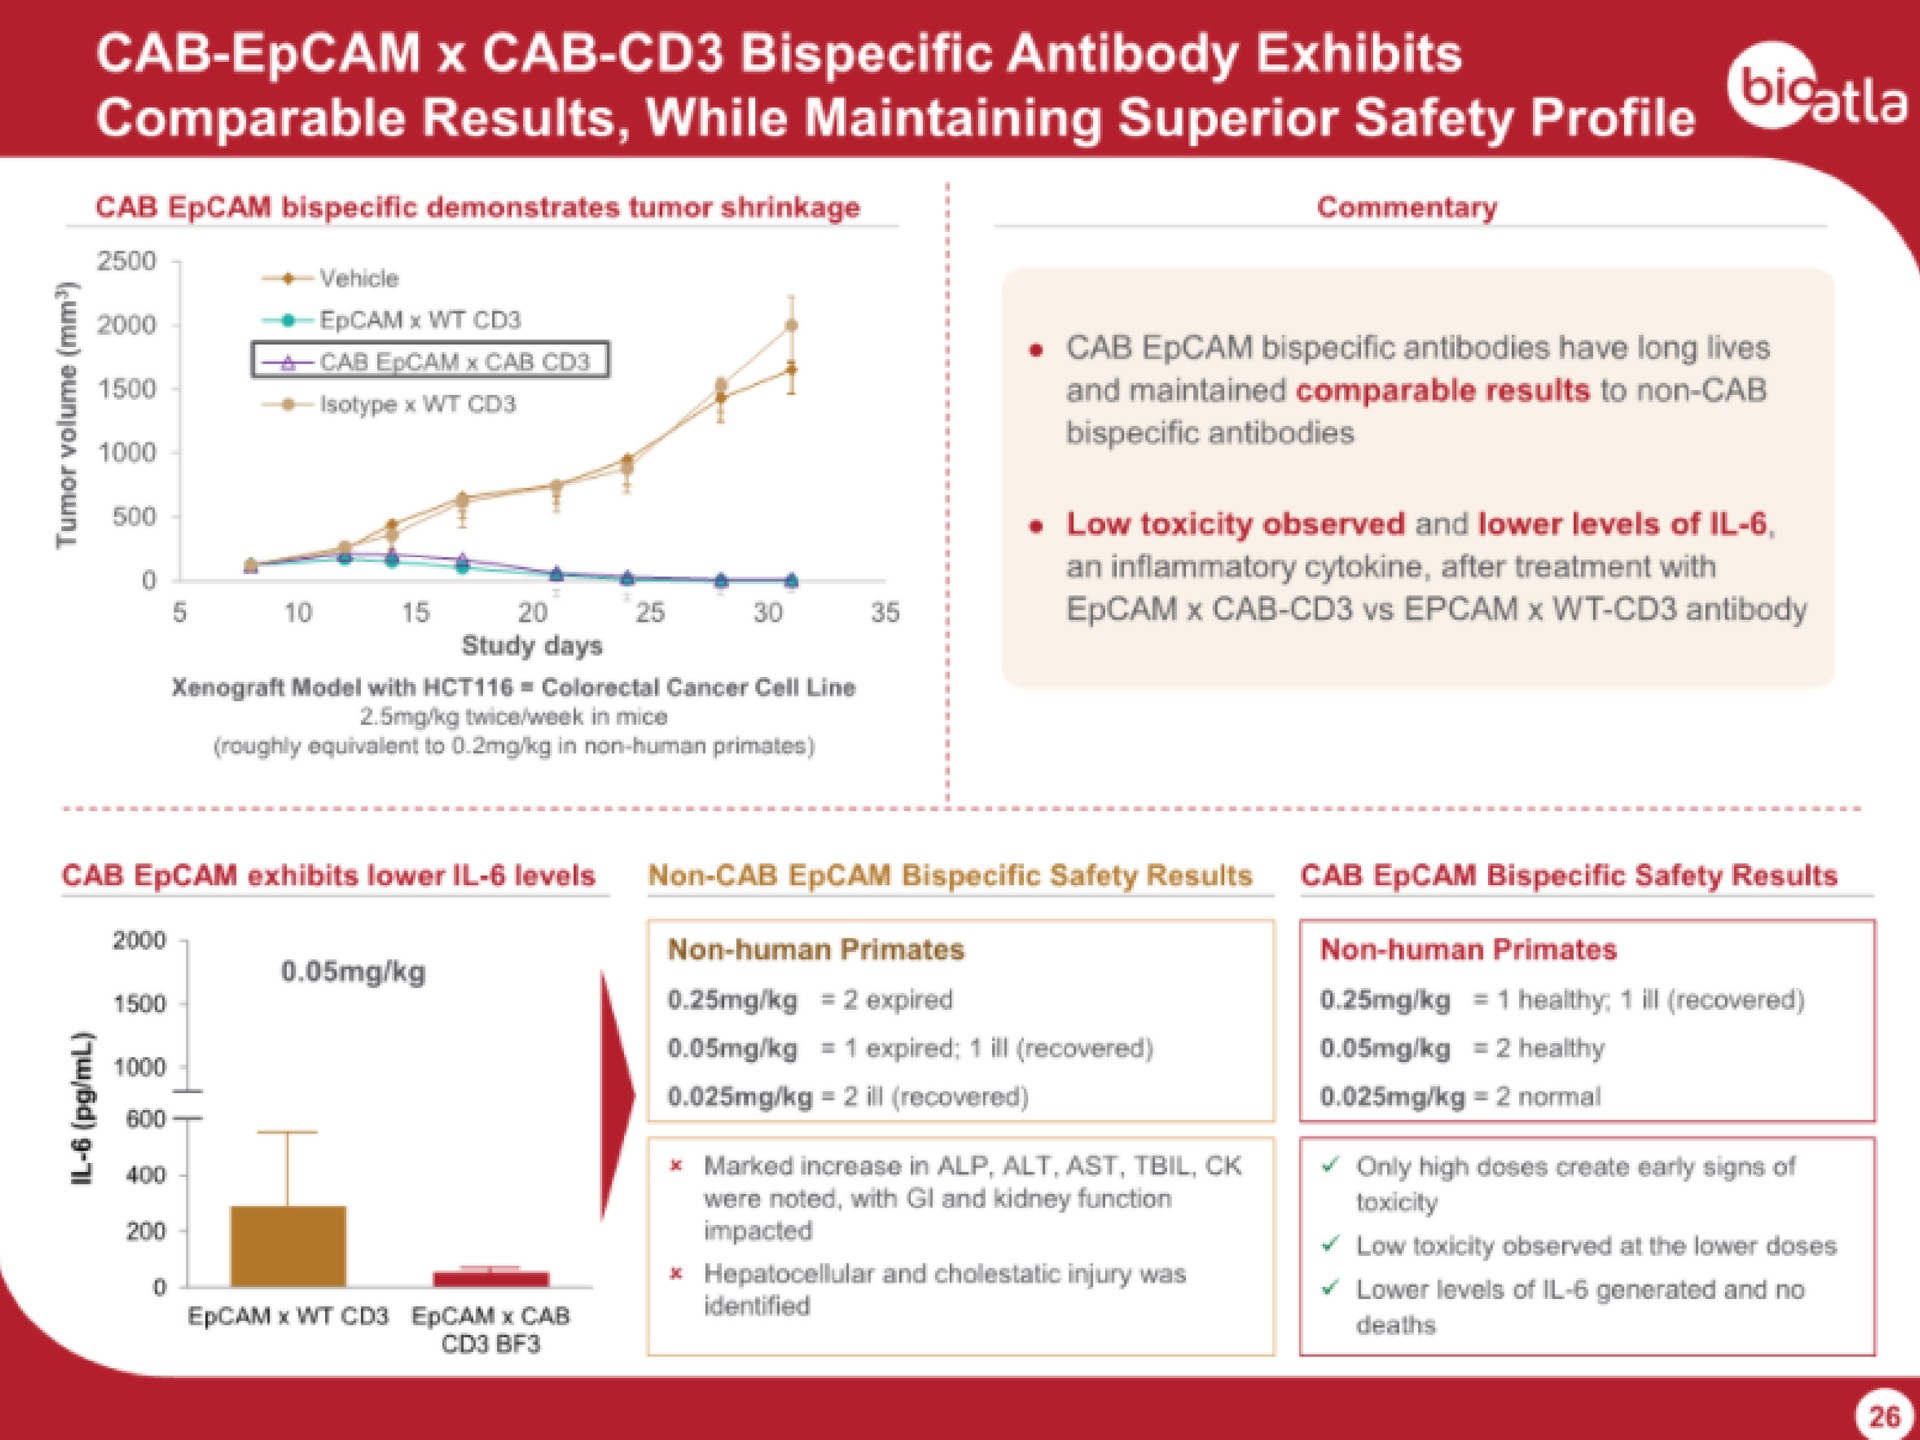 cab cab antibody exhibits comparable results while maintaining superior safety profile big | BioAtla